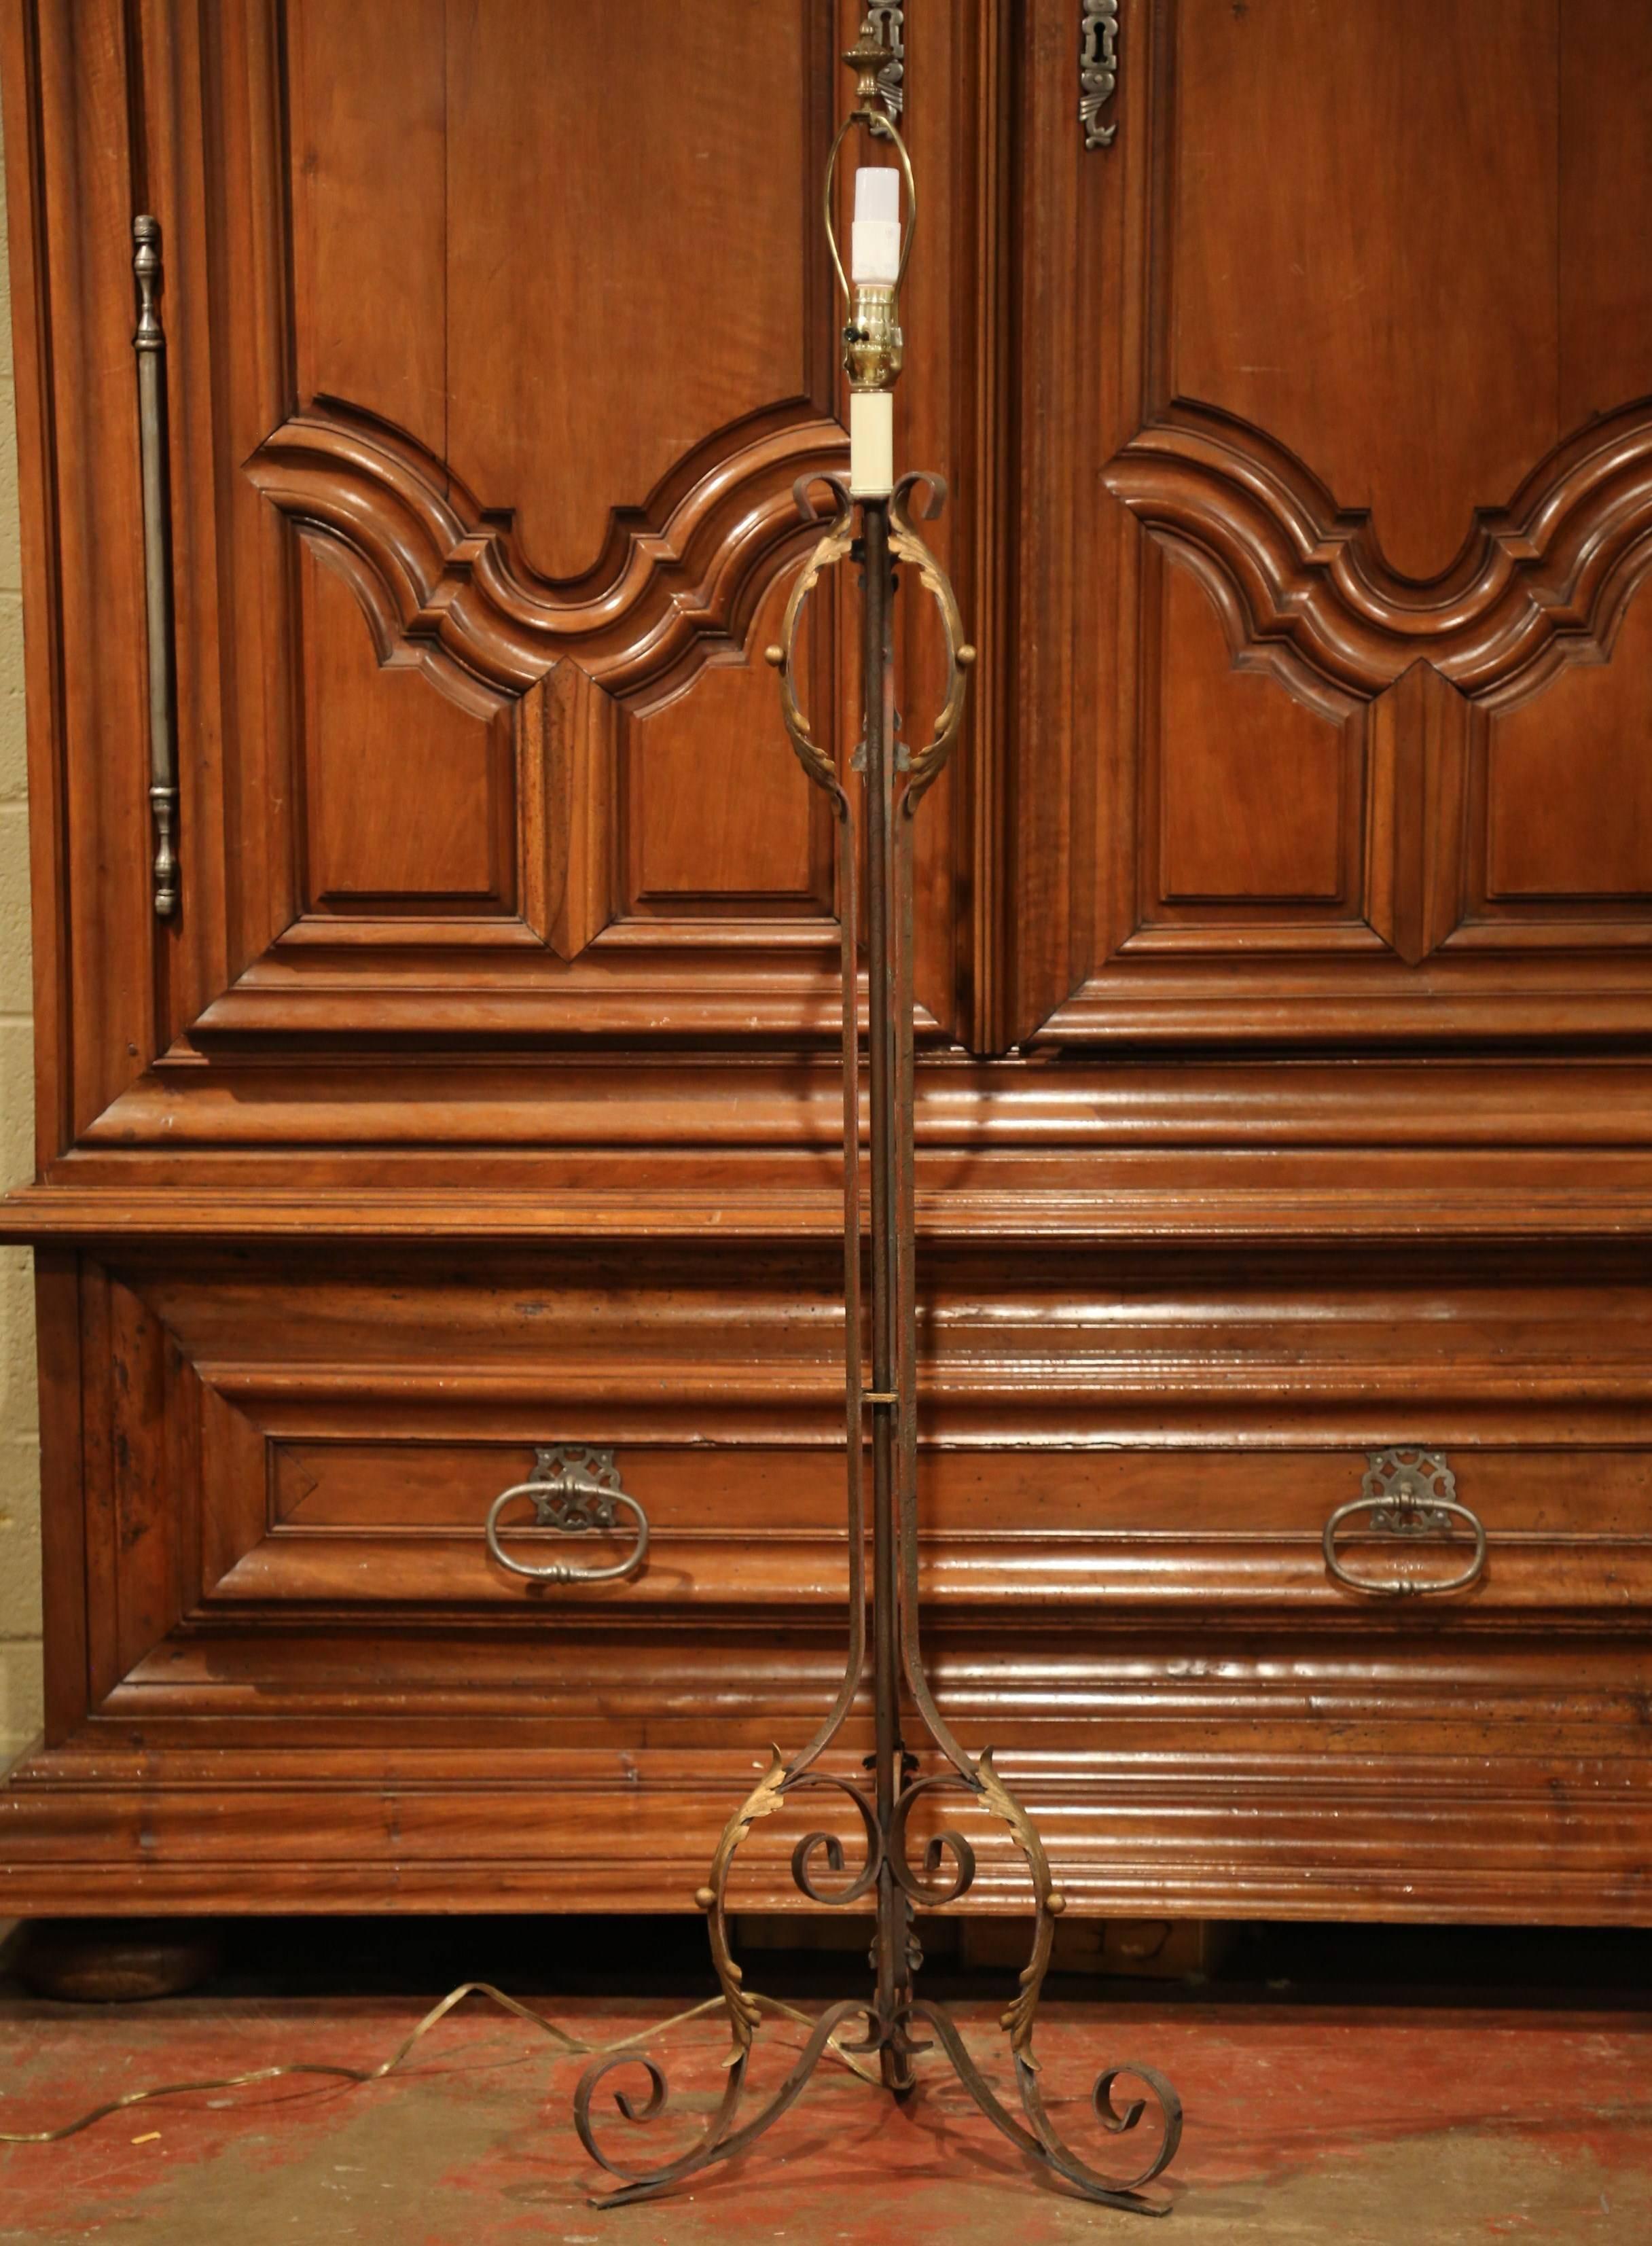 This elegant antique floor lamp crafted in France, circa 1920 would make a beautiful, rustic addition to a living room or study. The single light fixture lamp has been re-wired and features a beautiful, scrolled iron base resting on three legs. The